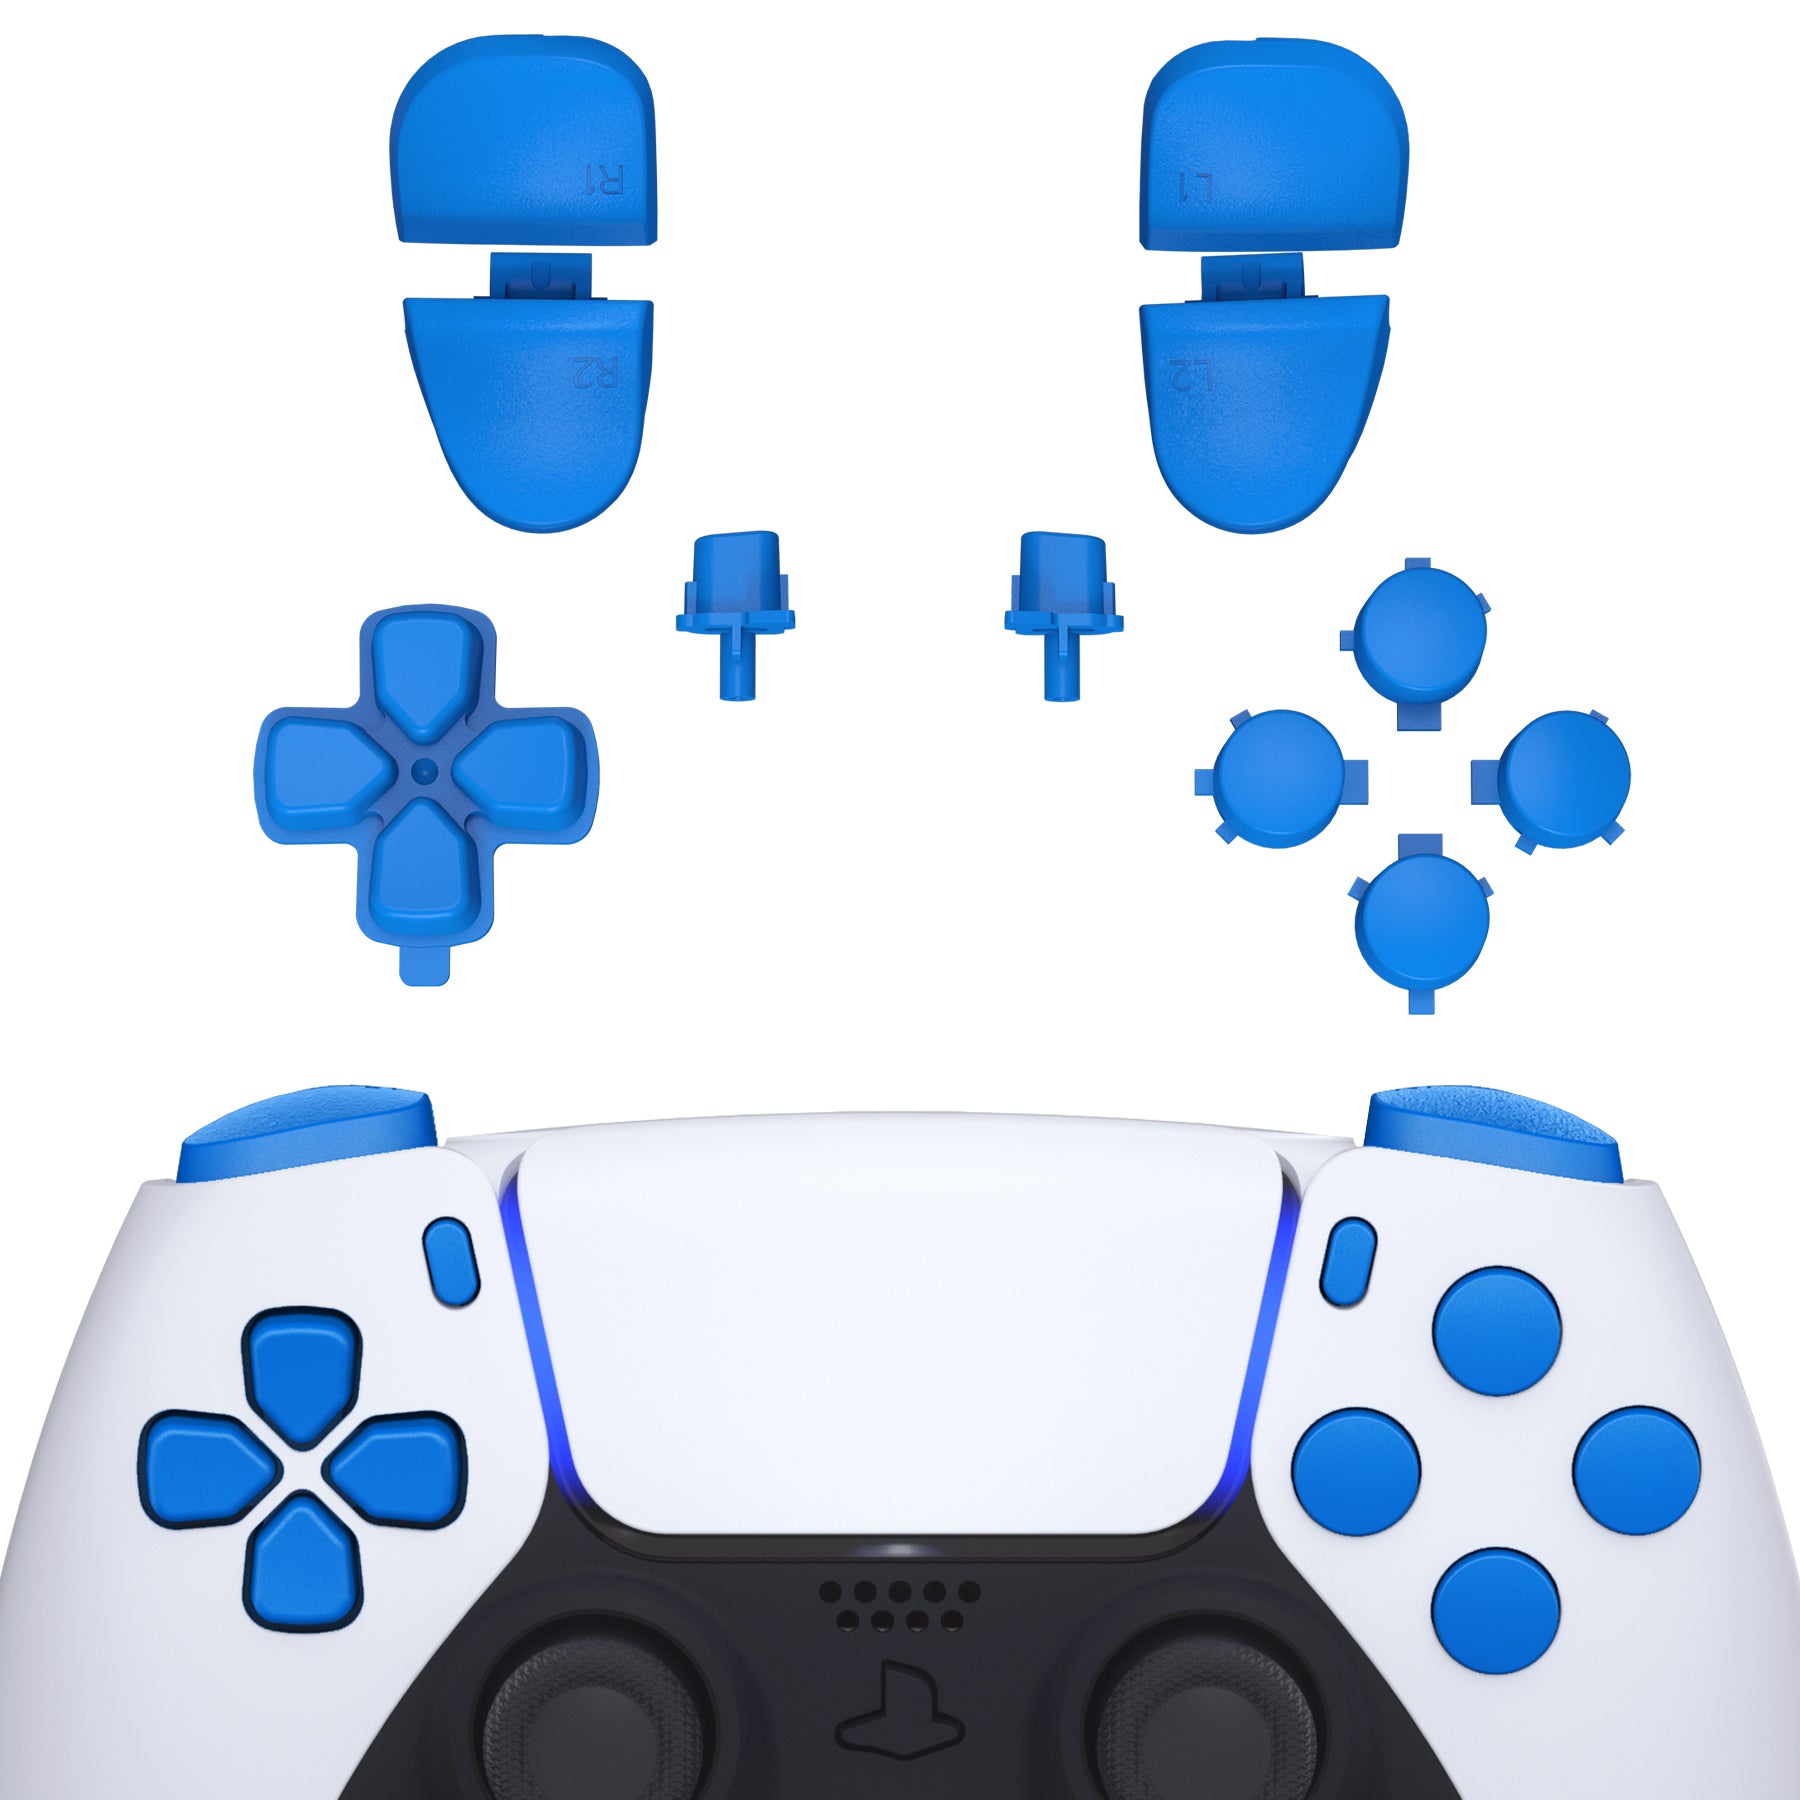 eXtremeRate Retail Replacement D-pad R1 L1 R2 L2 Triggers Share Options Face Buttons, Blue Full Set Buttons Compatible with ps5 Controller BDM-030 - JPF1005G3